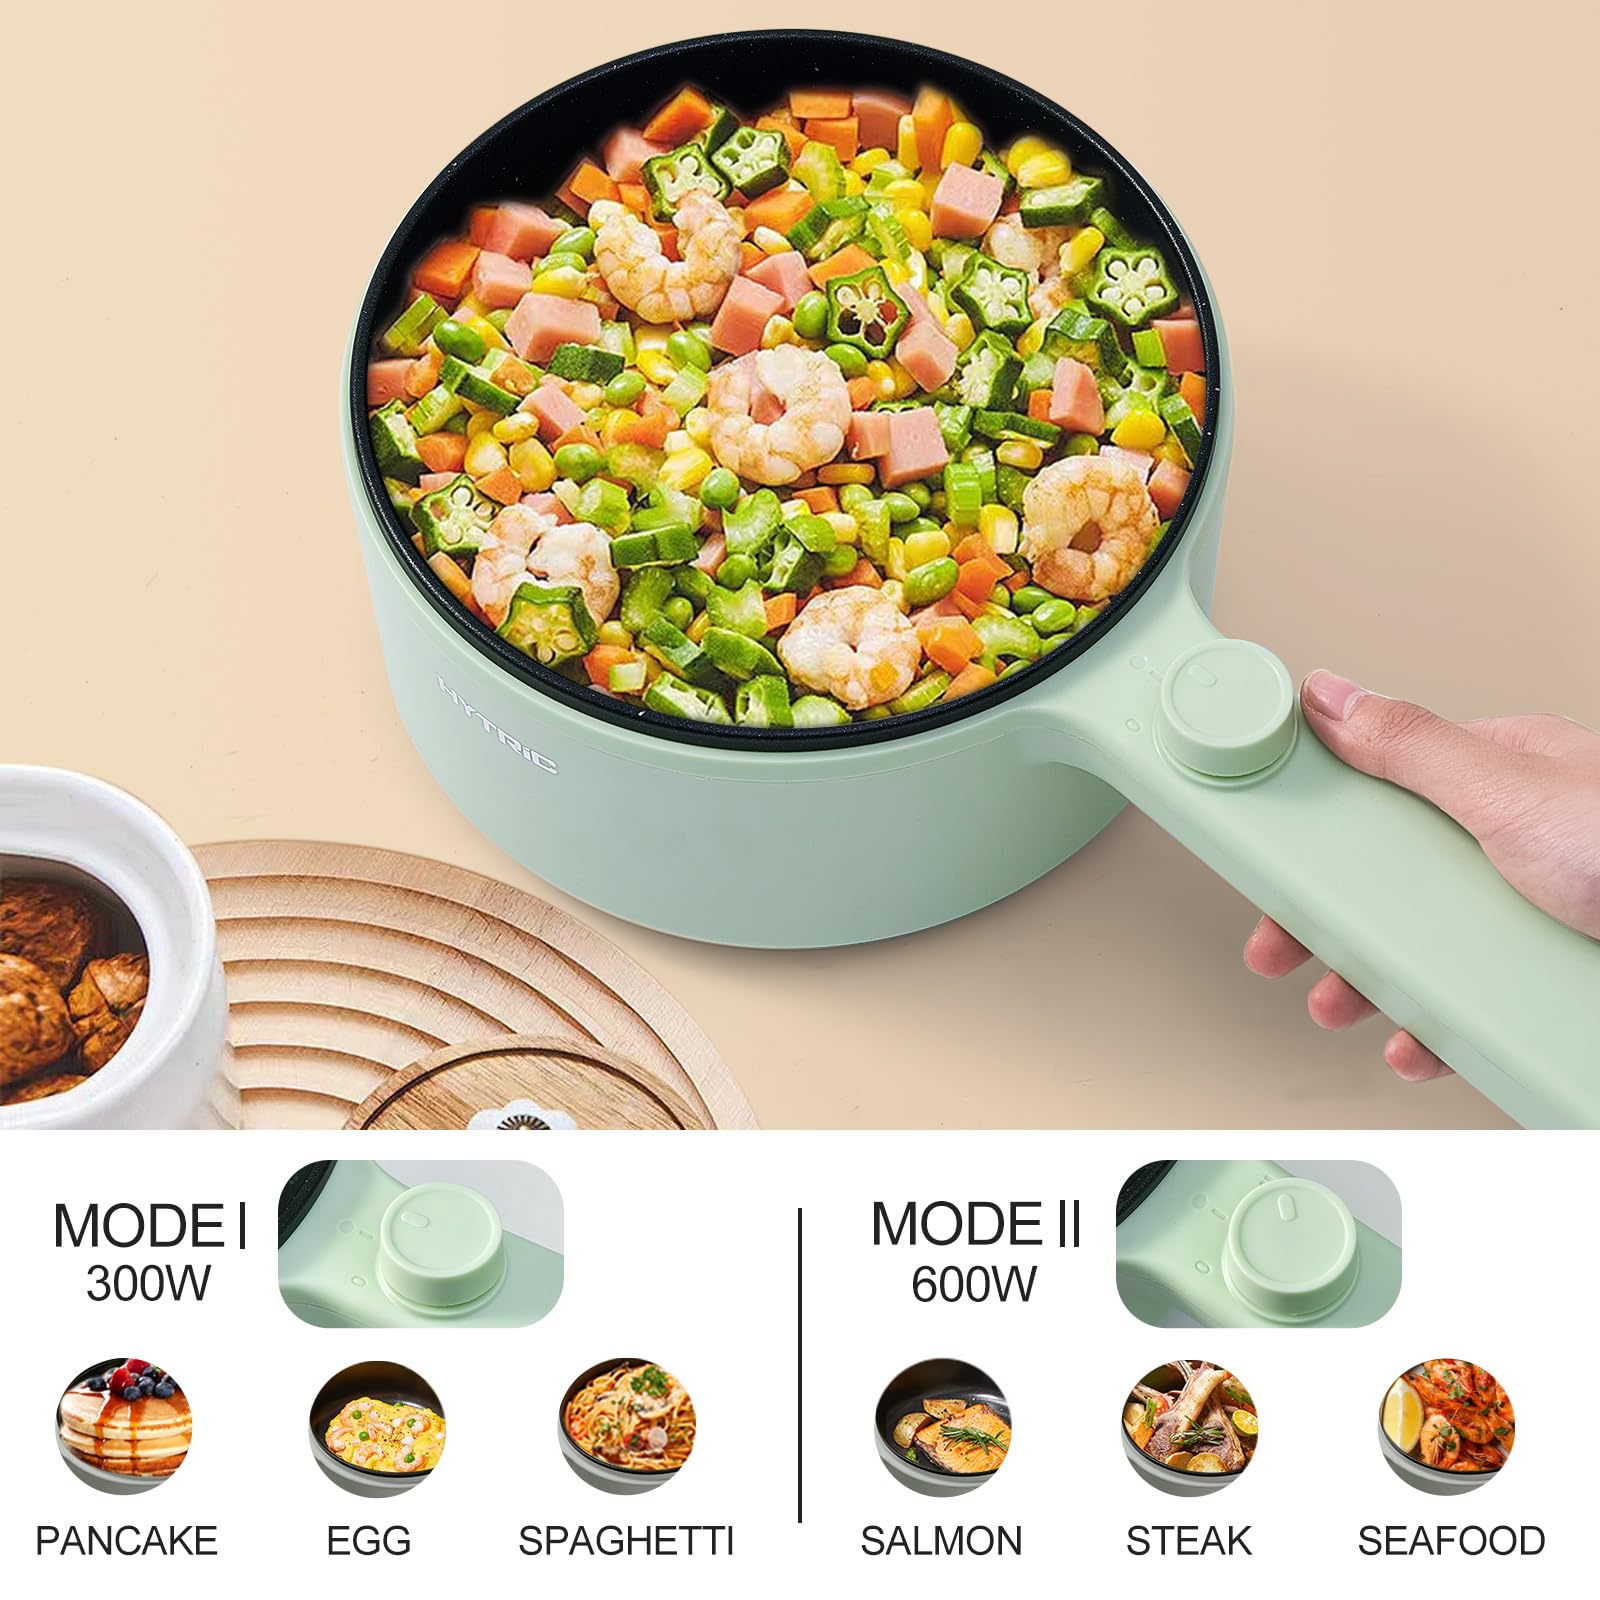 HYTRIC Hot Pot Electric, 1.5L Portable Non-stick Frying Pan, Electric Cooker for Steak, Egg, Pasta, Ramen Cooker with Dual Power Control, Mini Electric Pot for Office, Dorm Room Essential, Green